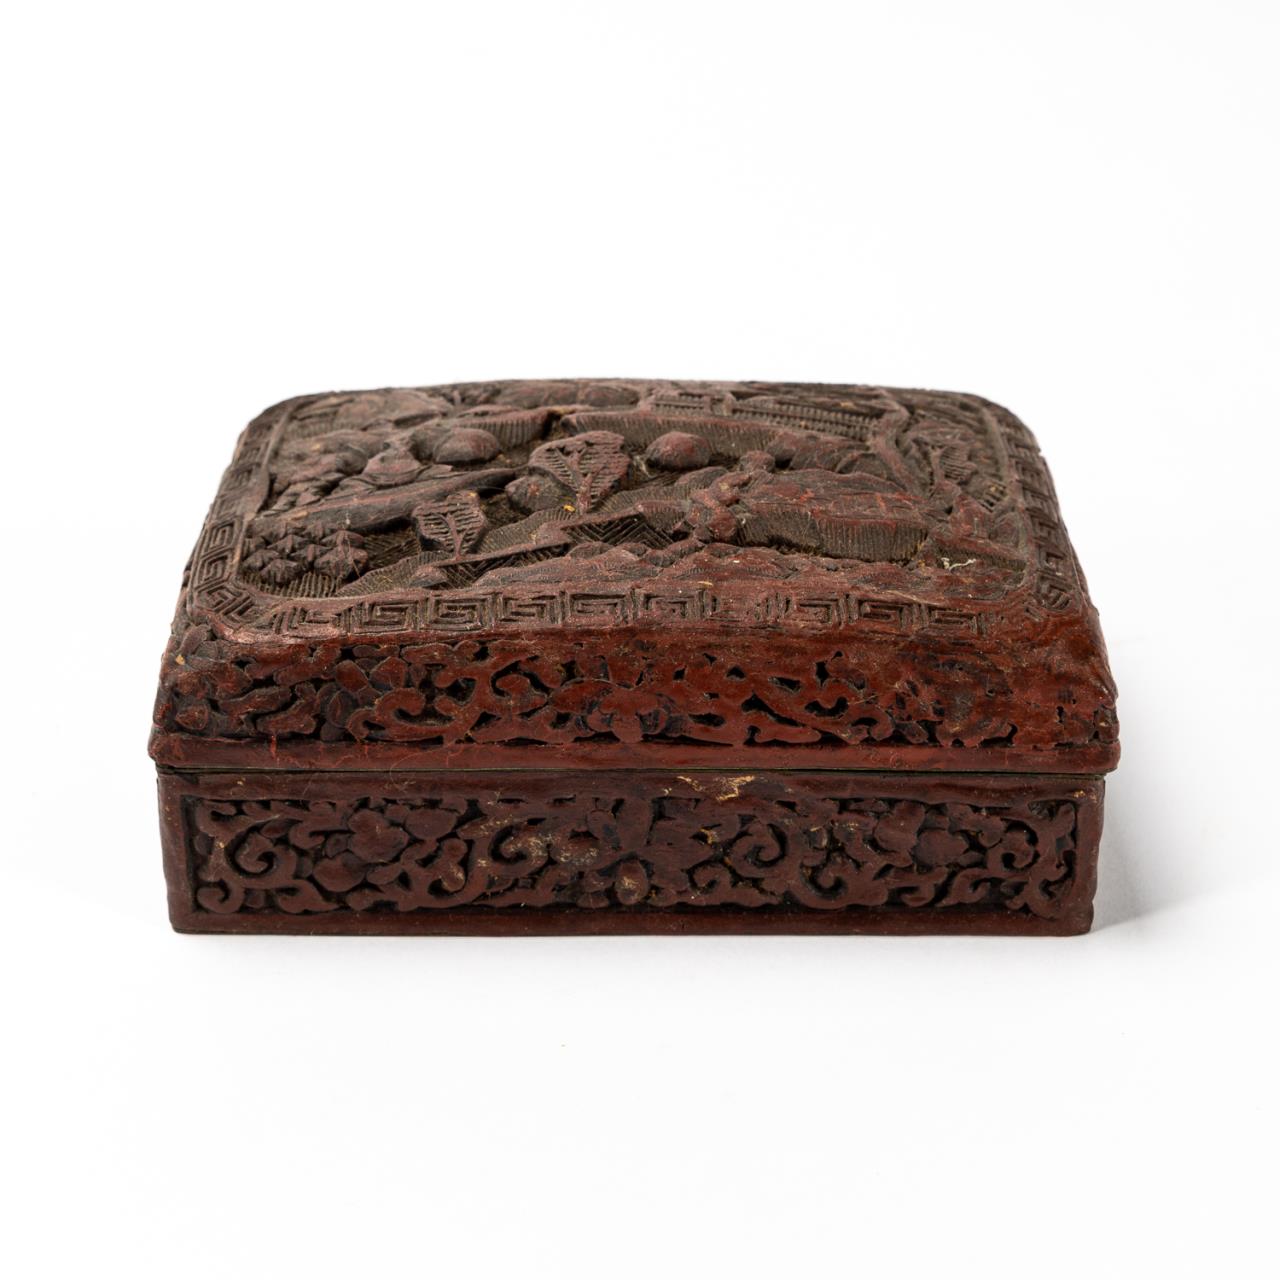 CHINESE CARVED CINNABAR LIDDED 35d821